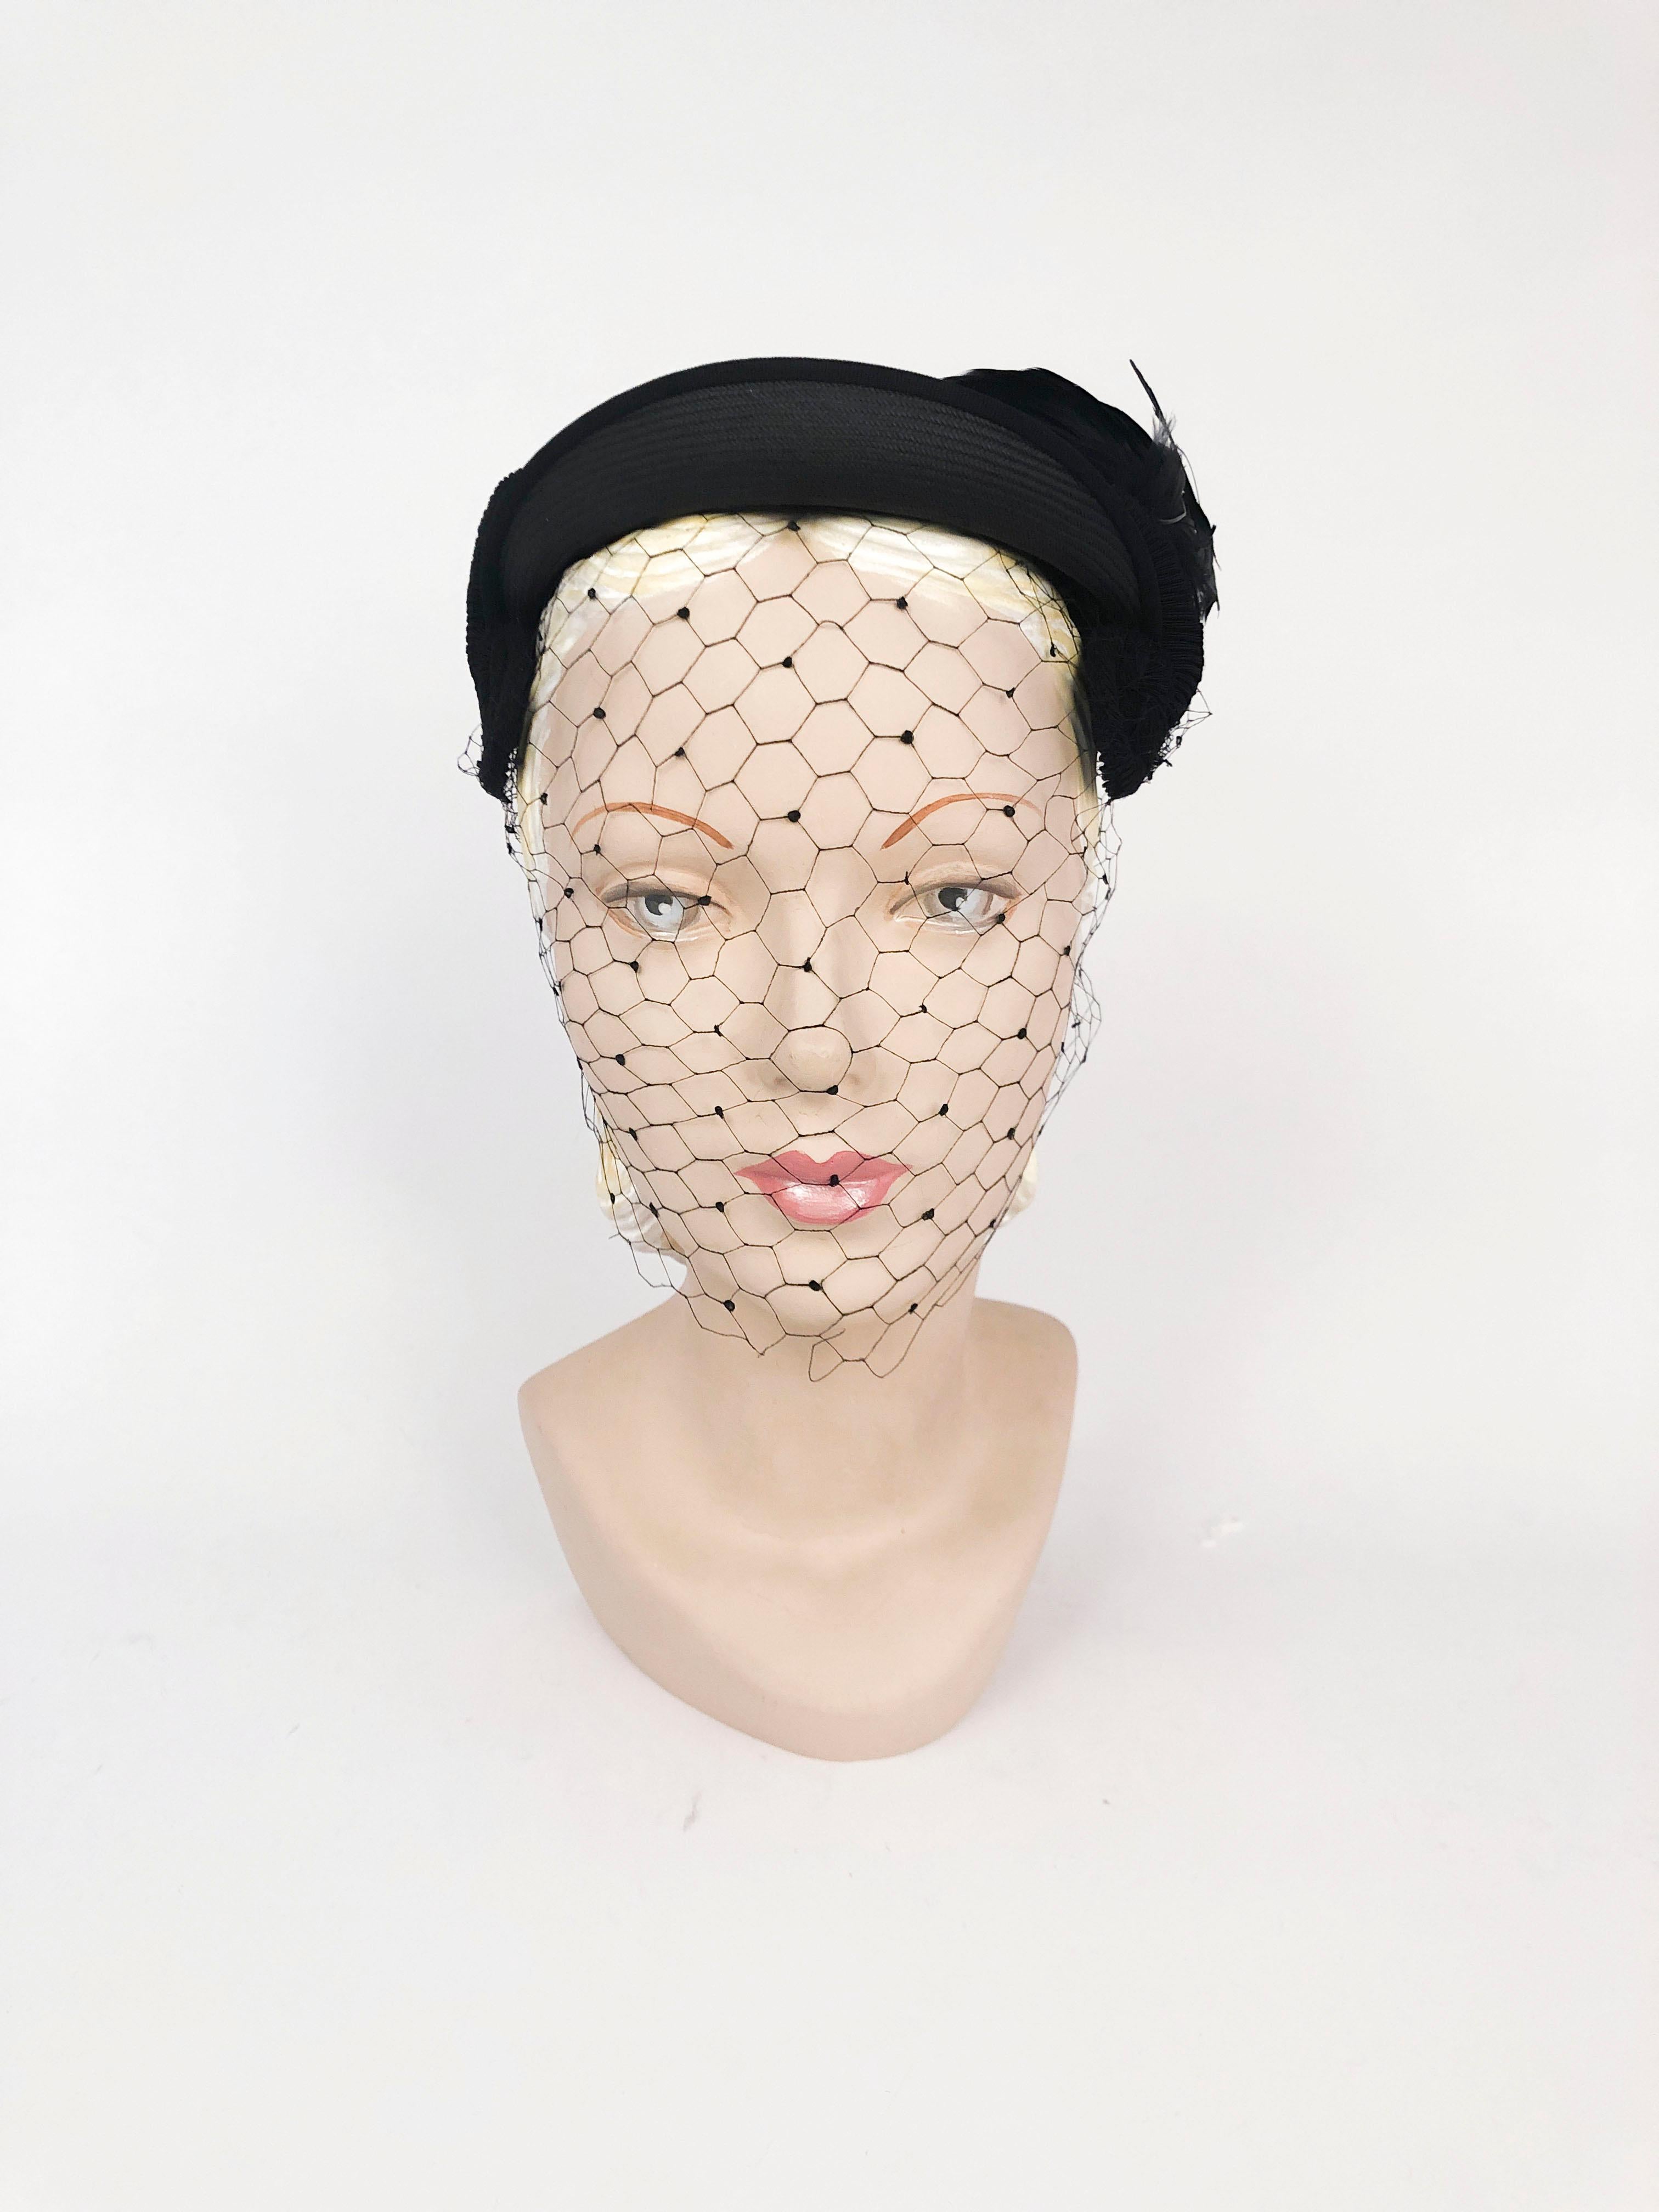 1950s Black Panama Straw Hat with Ruched gros-grain trimming and Feather Accents. This Hat also features a full face veil that is either tied or pinned in the back of the head.